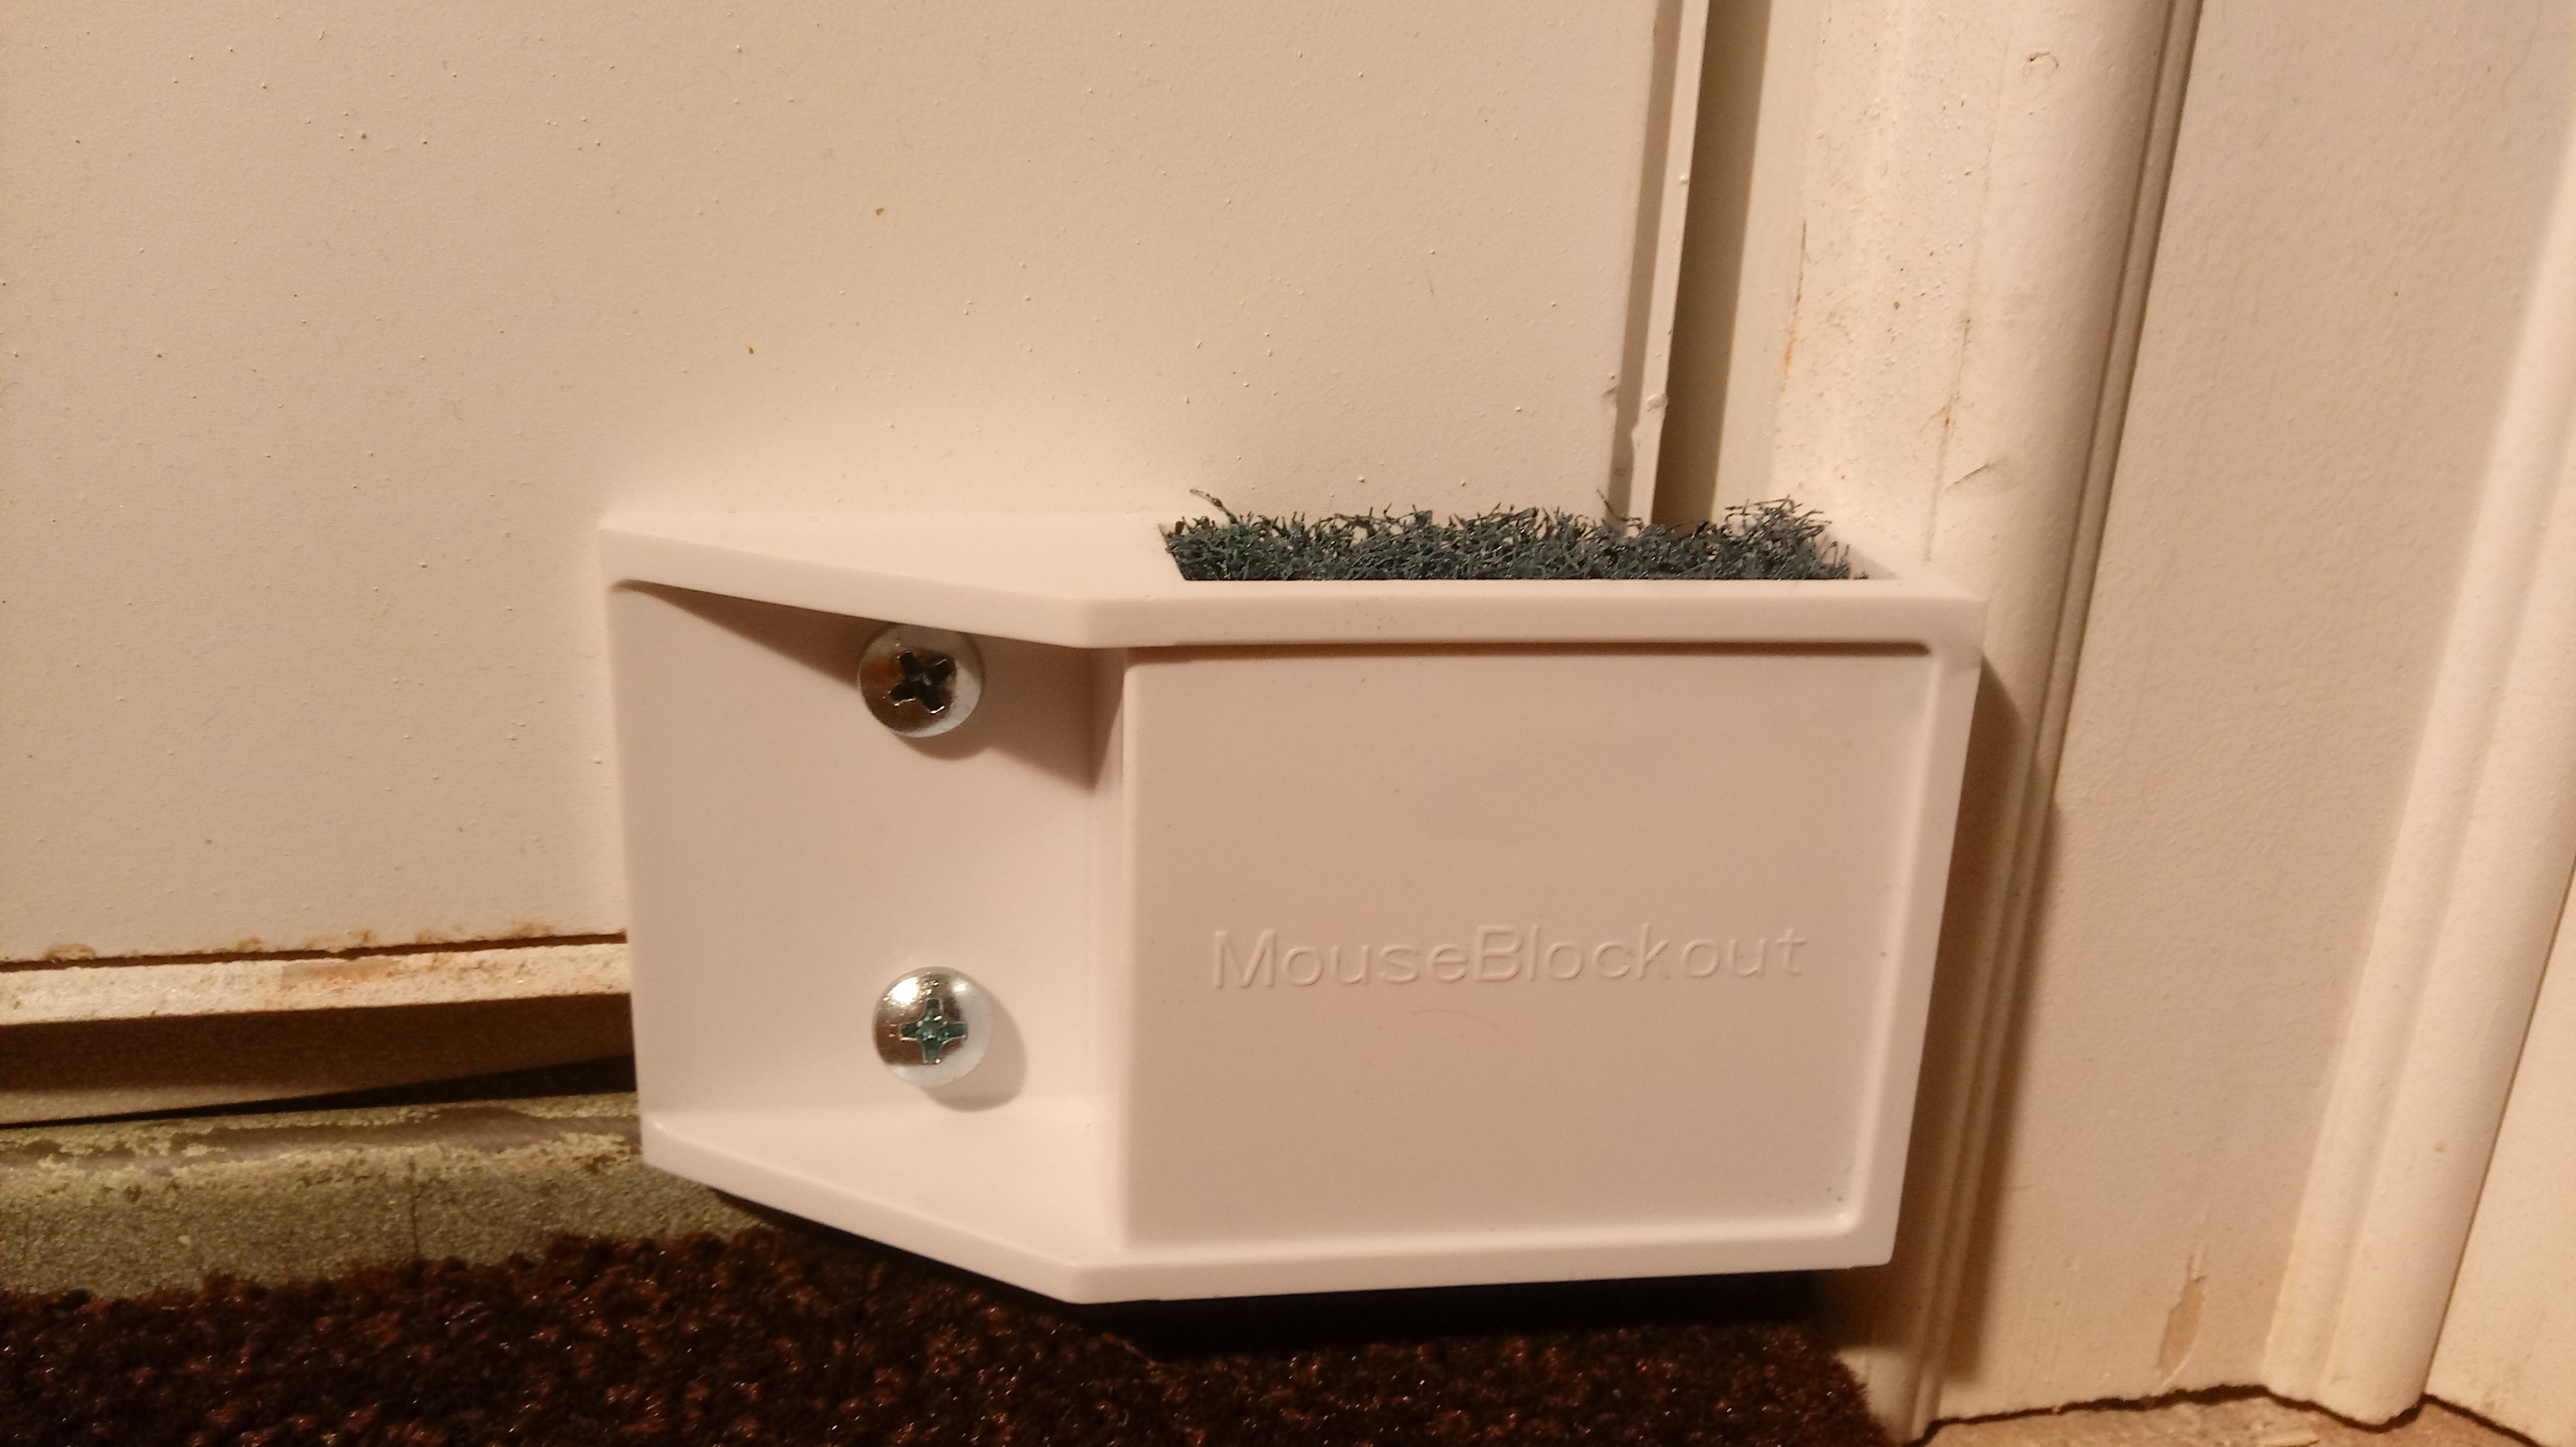 MouseBlockout for entry doors